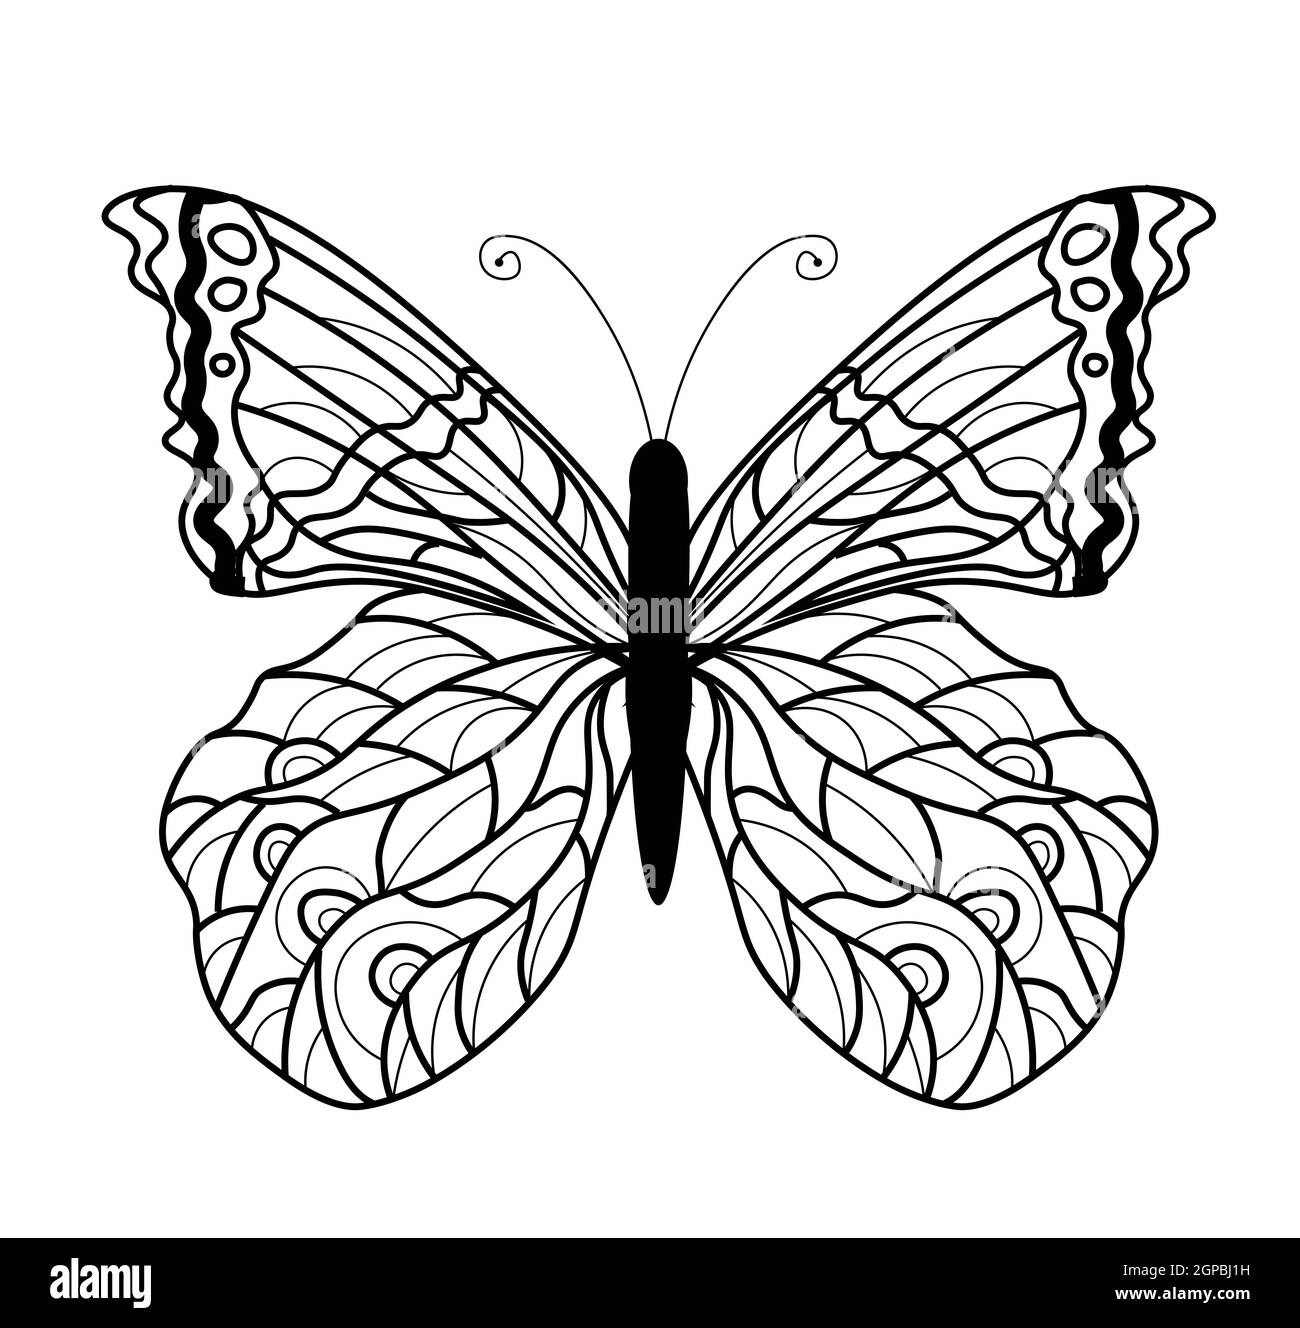 Butterfly coloring book. Linear drawing of a butterfly. Stock Photo